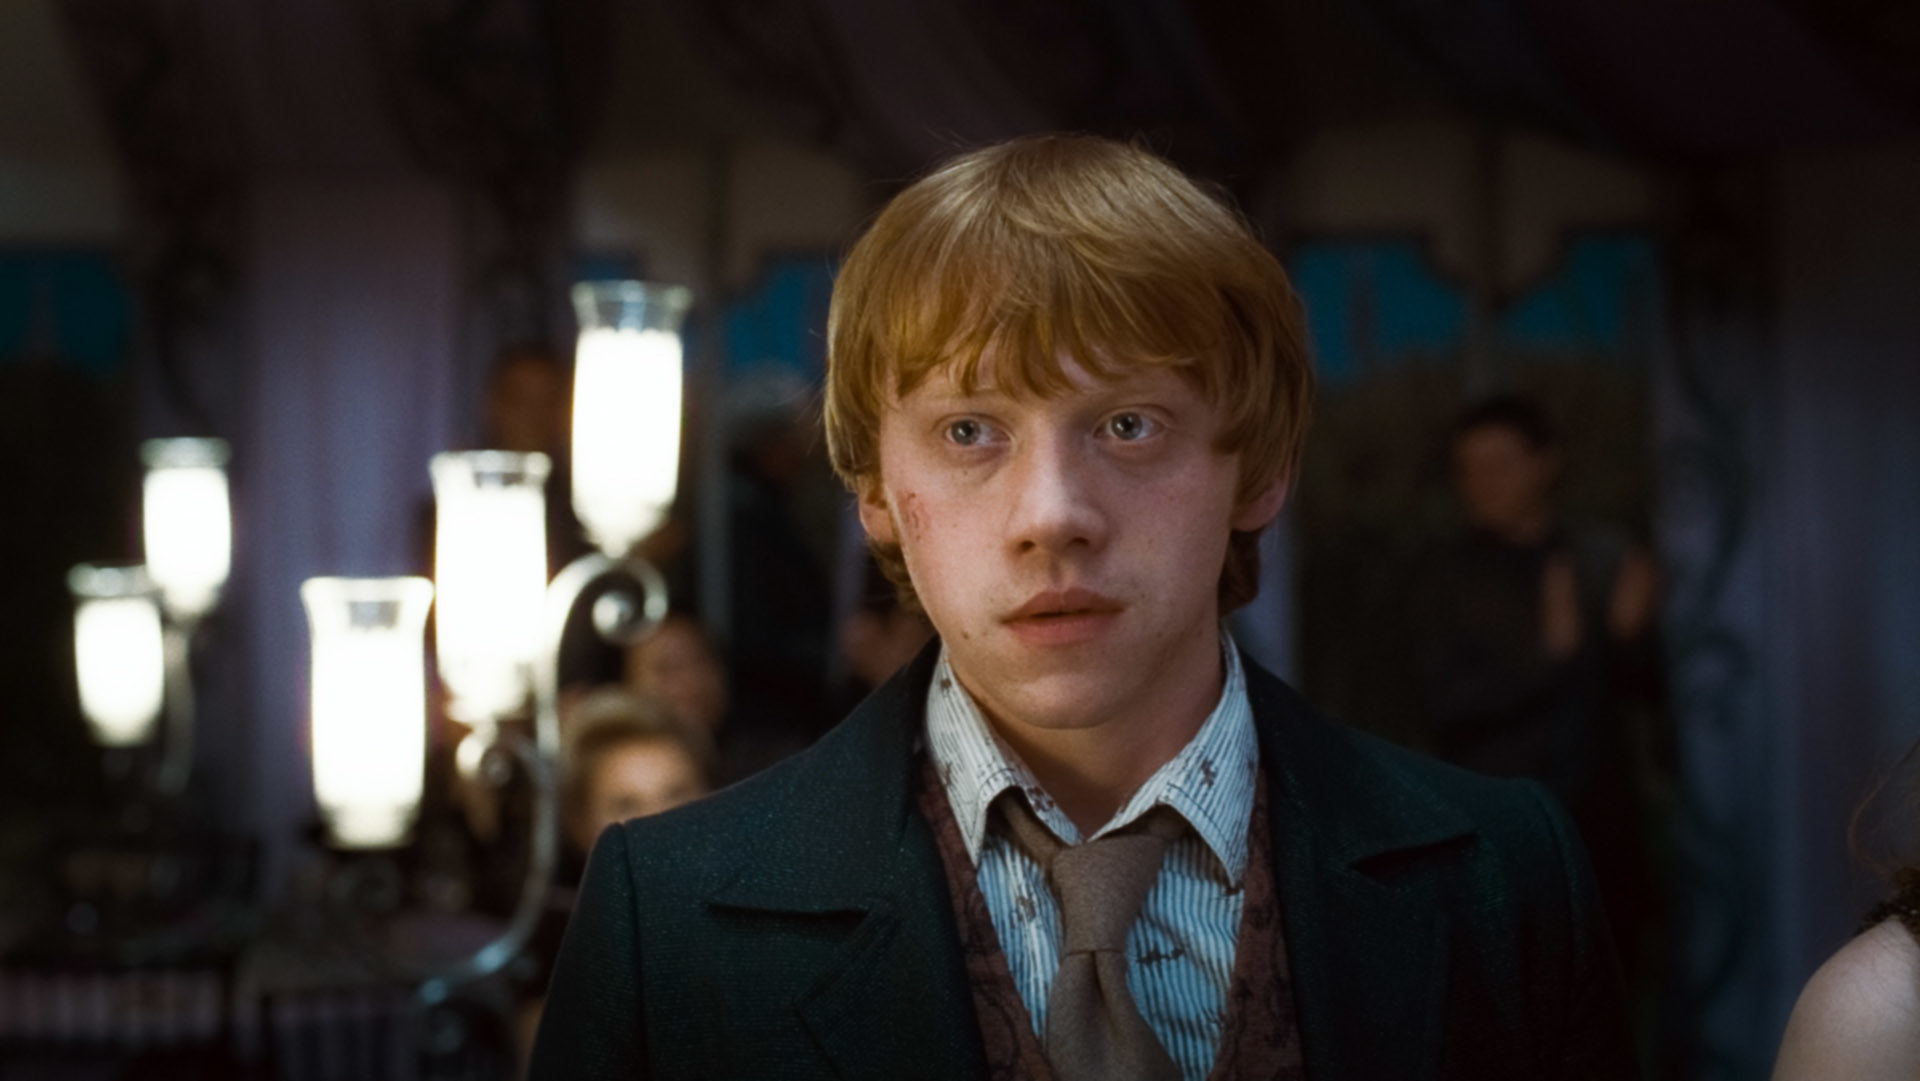 Rupert Grint in Harry Potter and the Deathly Hallows: Part 1